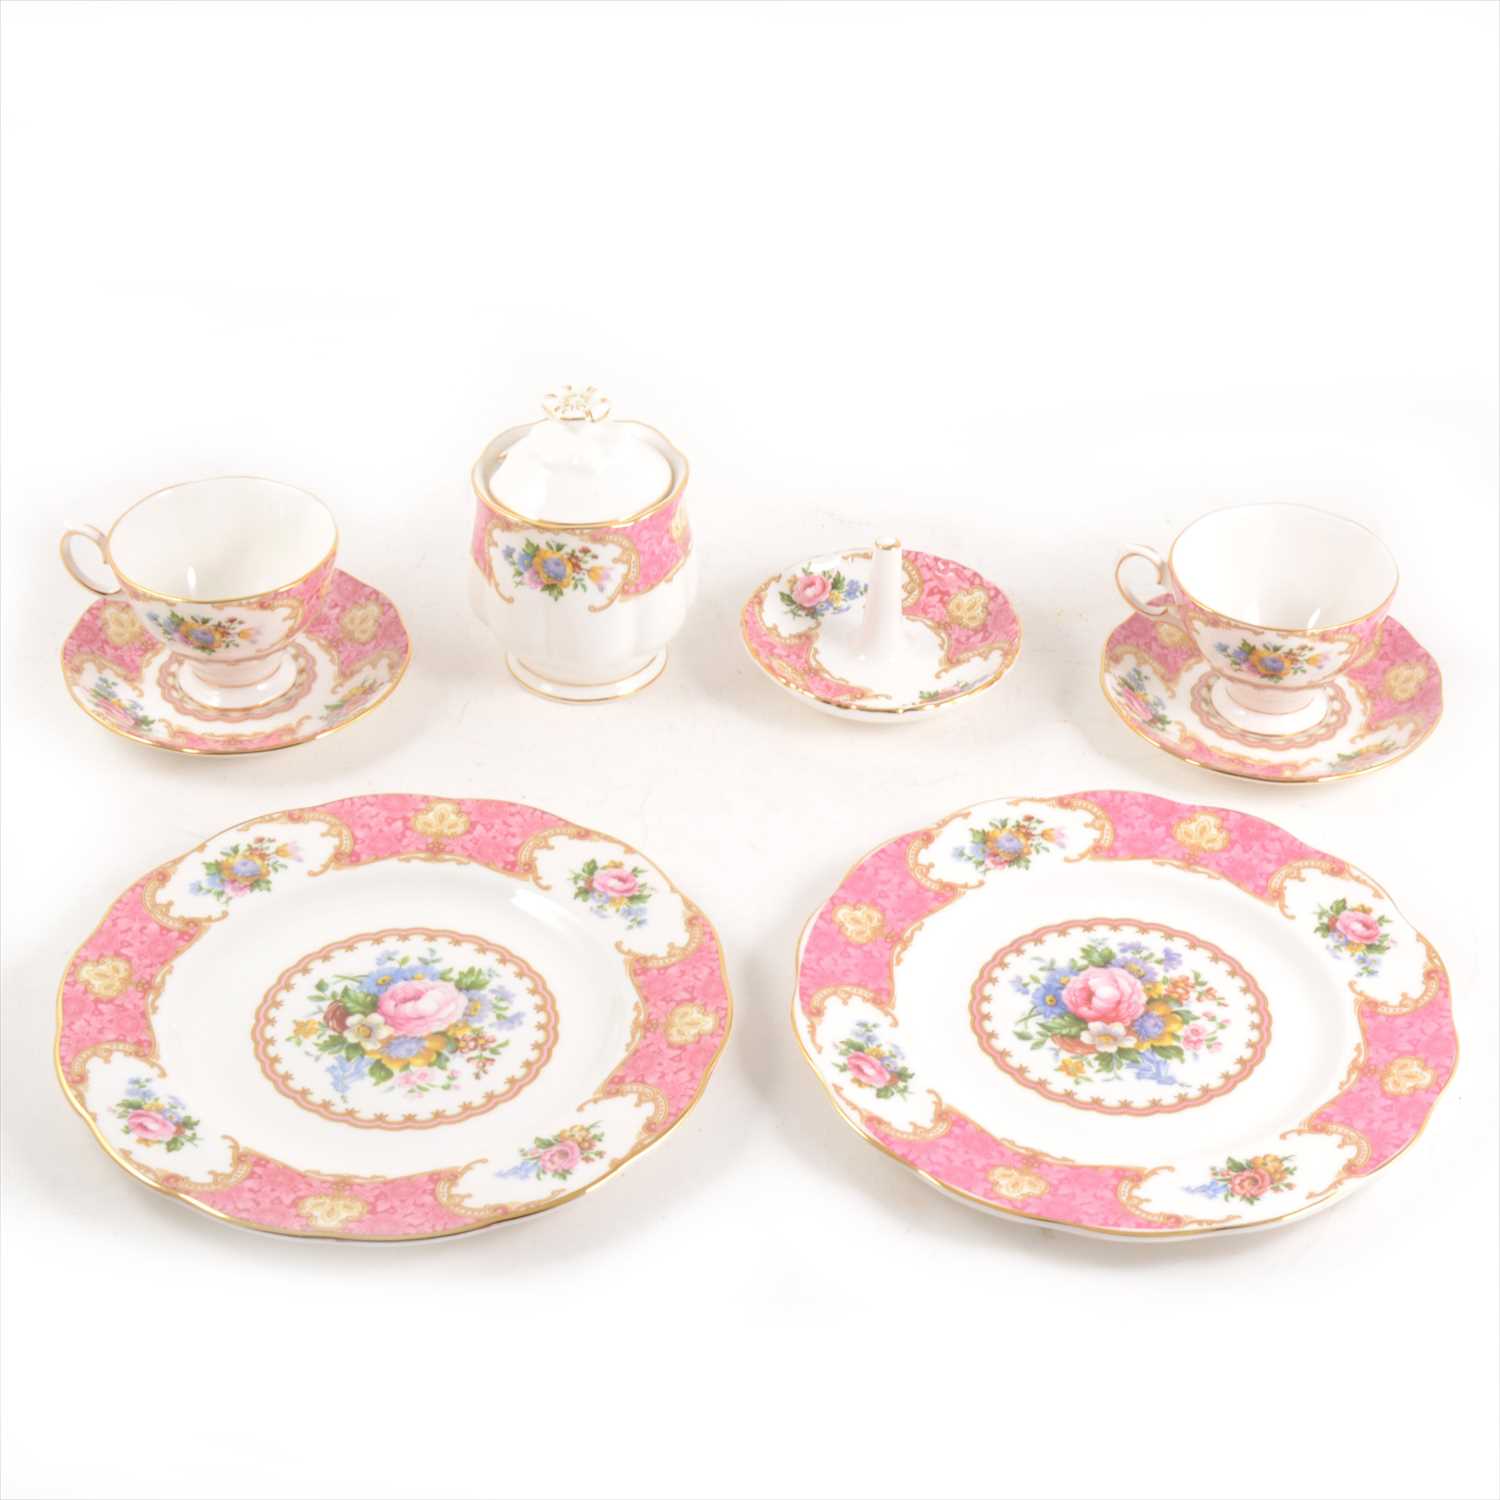 Lot 98 - An extensive Royal Albert dinner, tea, and coffee service, Lady Carlyle pattern